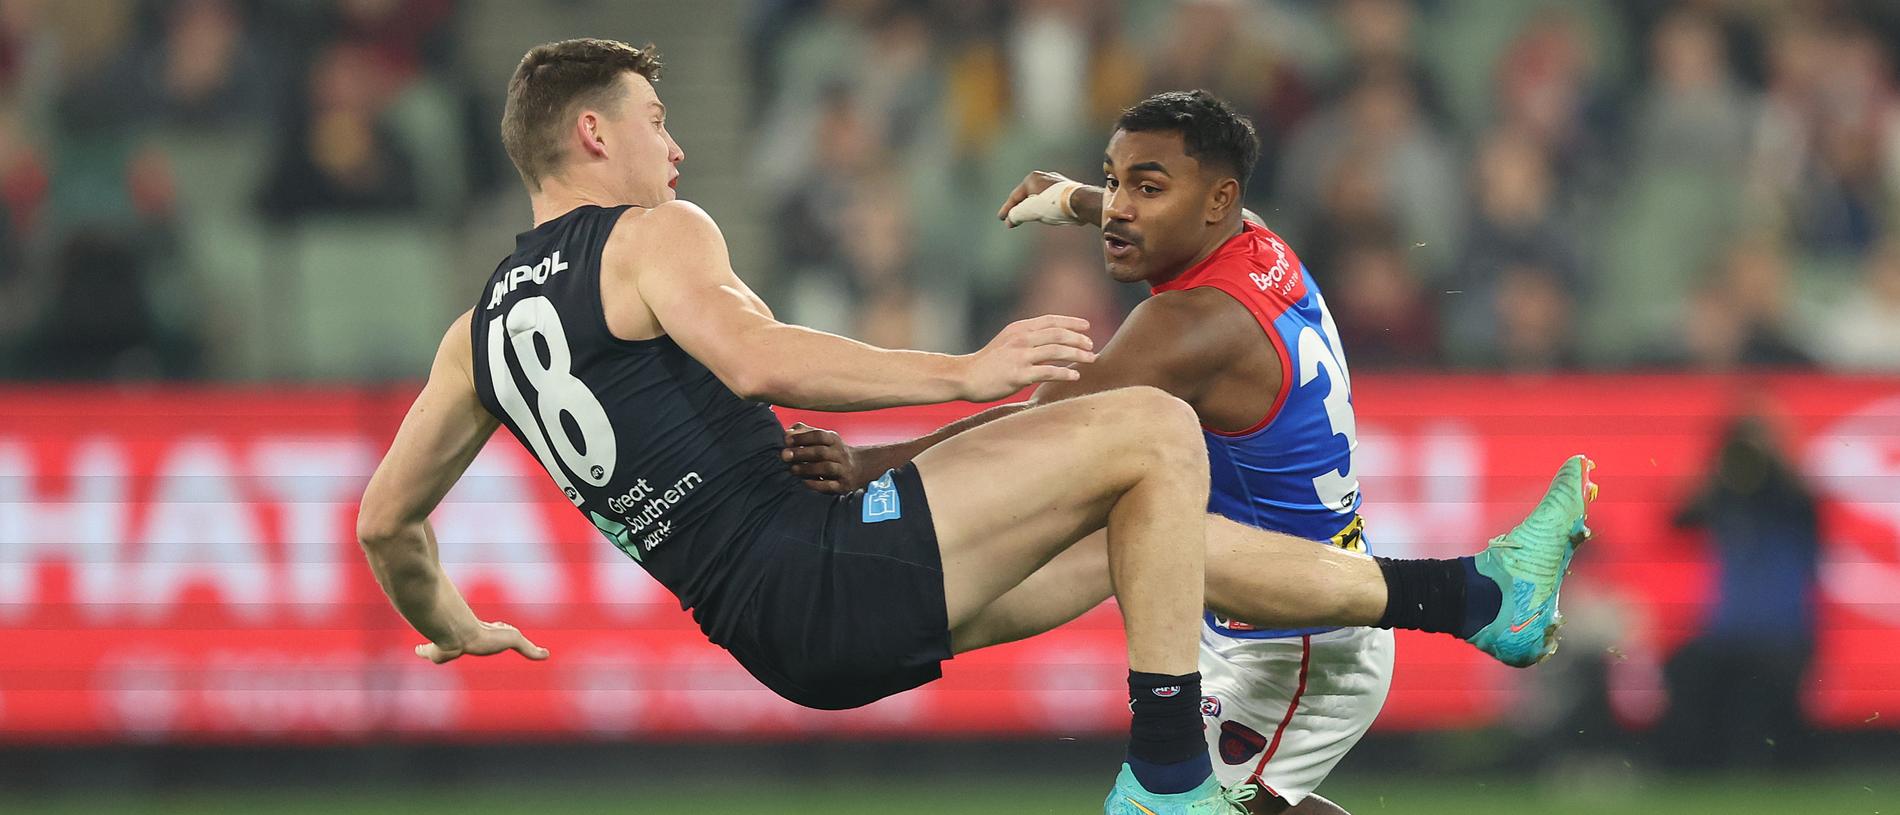 MELBOURNE, AUSTRALIA - MAY 09: Sam Walsh of the Blues is challenged by Kysaiah Pickett of the Demons during the round nine AFL match between Carlton Blues and Melbourne Demons at Melbourne Cricket Ground, on May 09, 2024, in Melbourne, Australia. (Photo by Robert Cianflone/Getty Images)